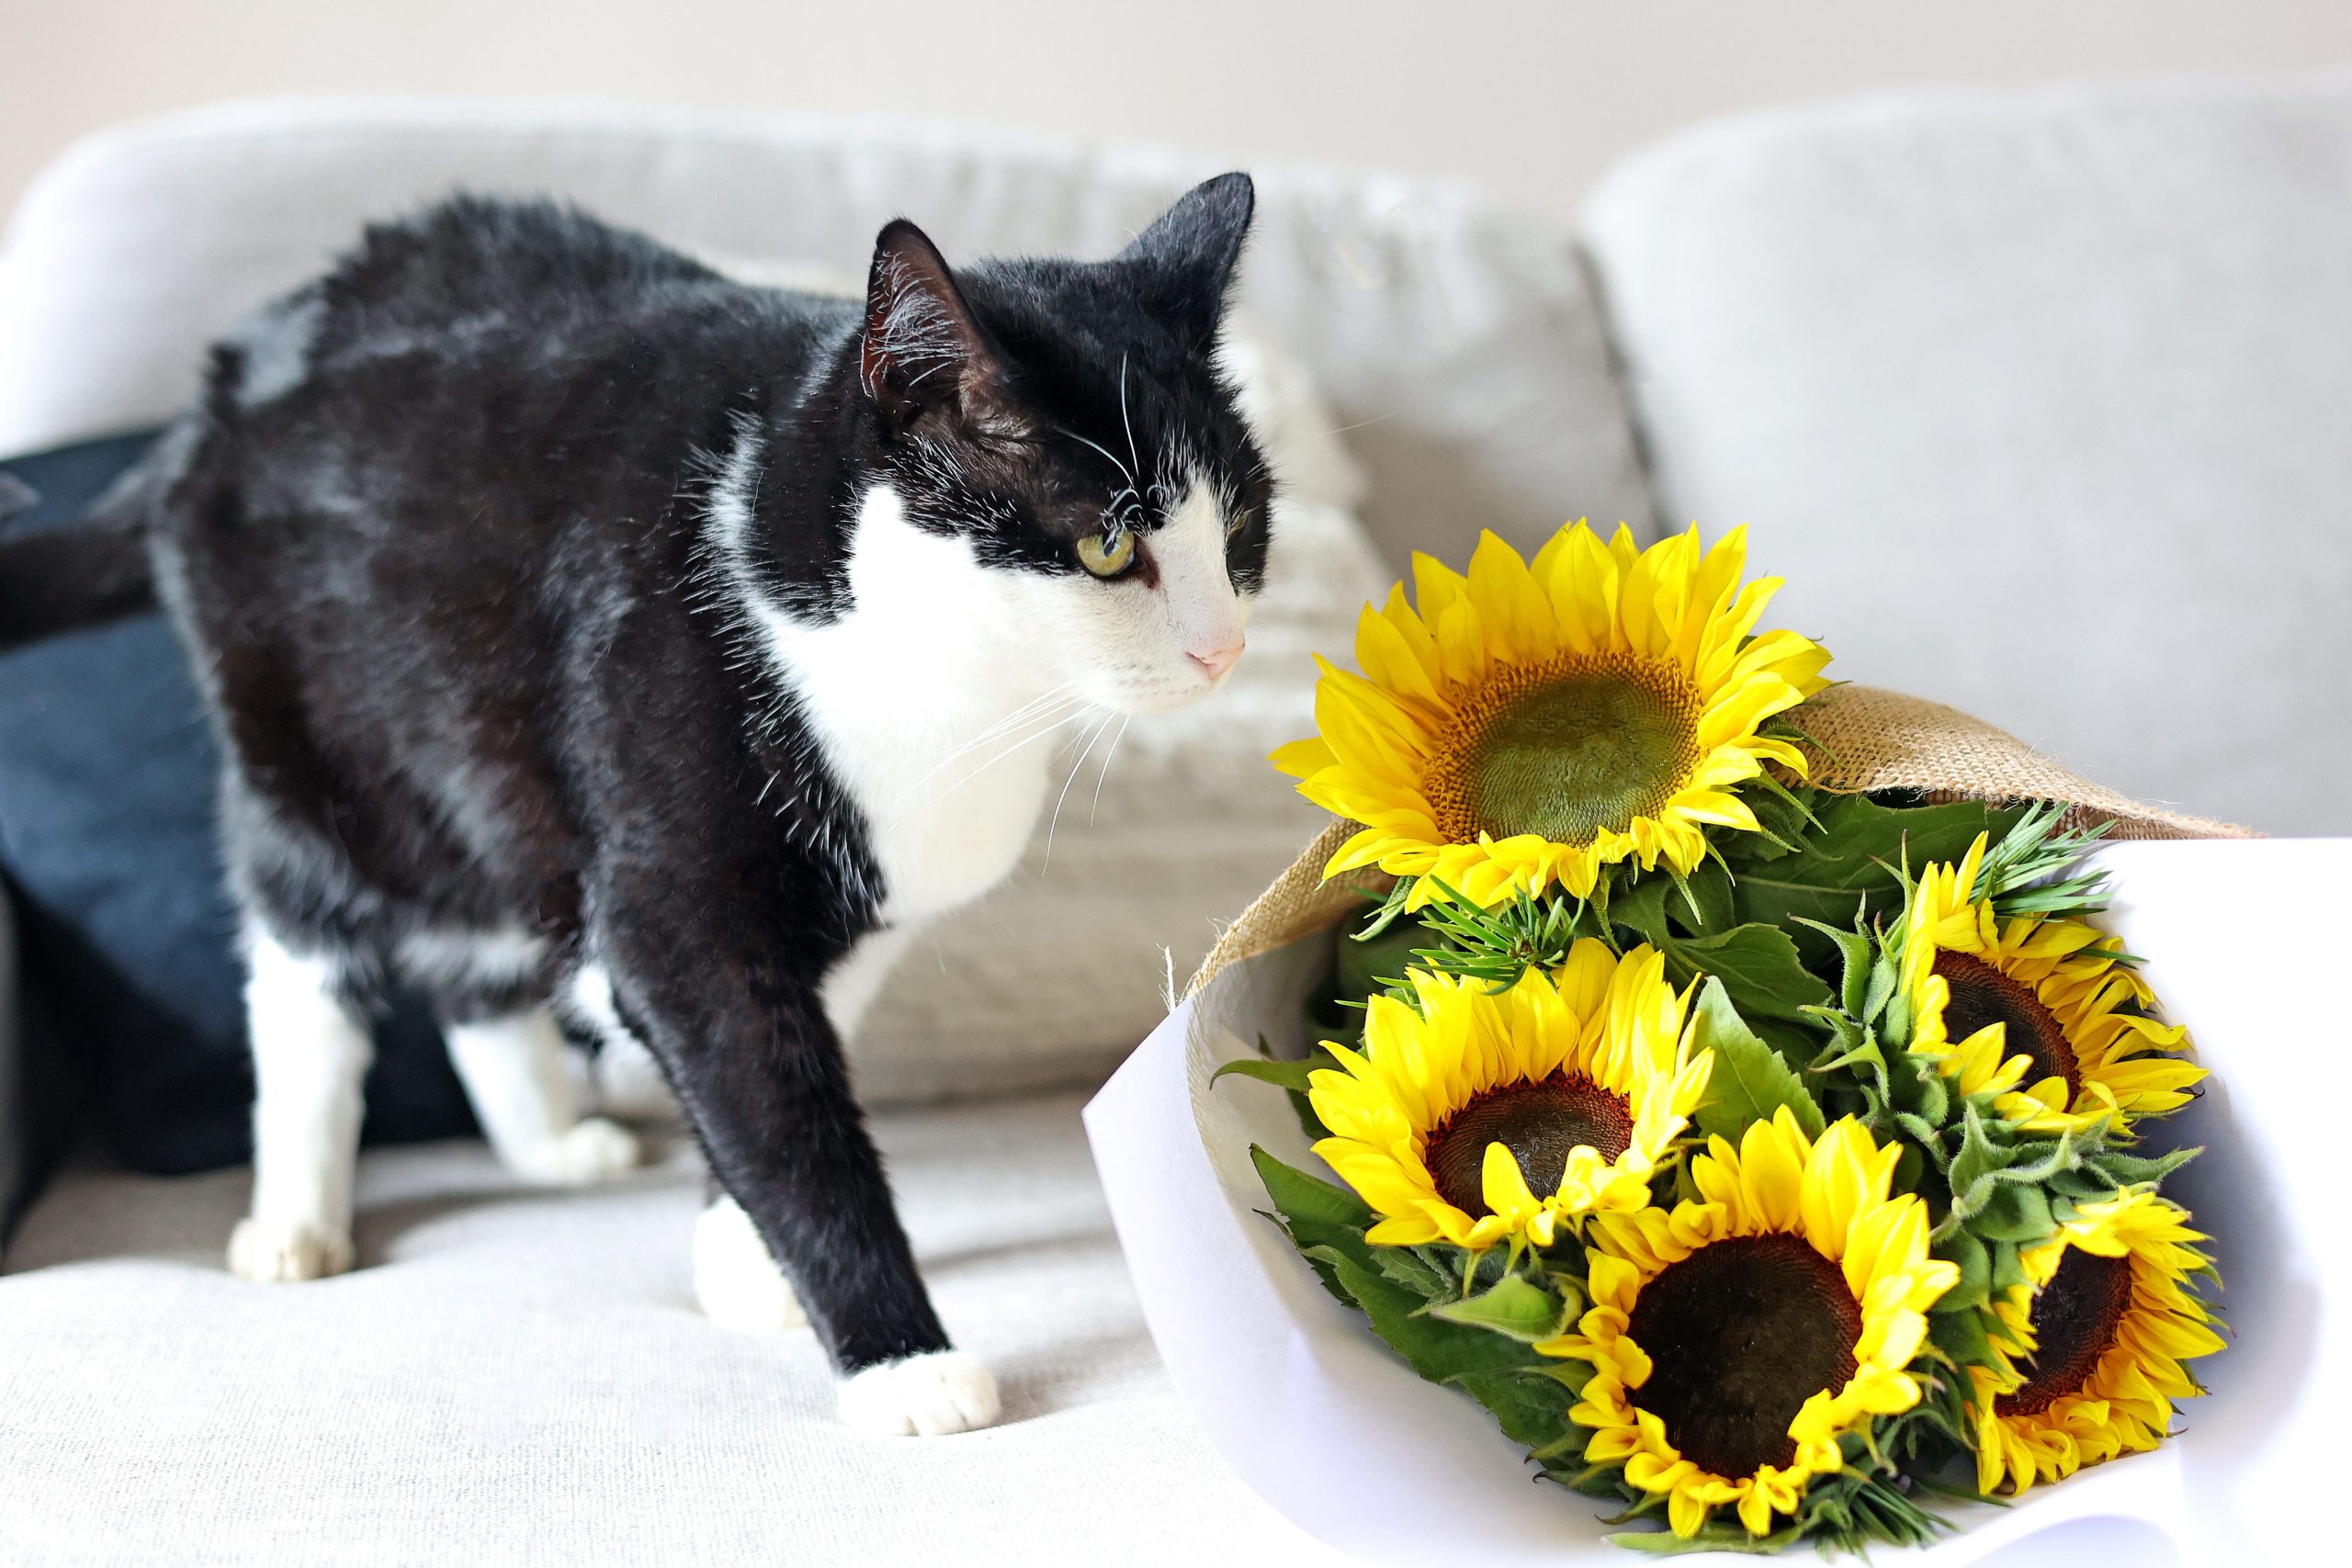 A cat sniffing sunflowers, which are safe for pets